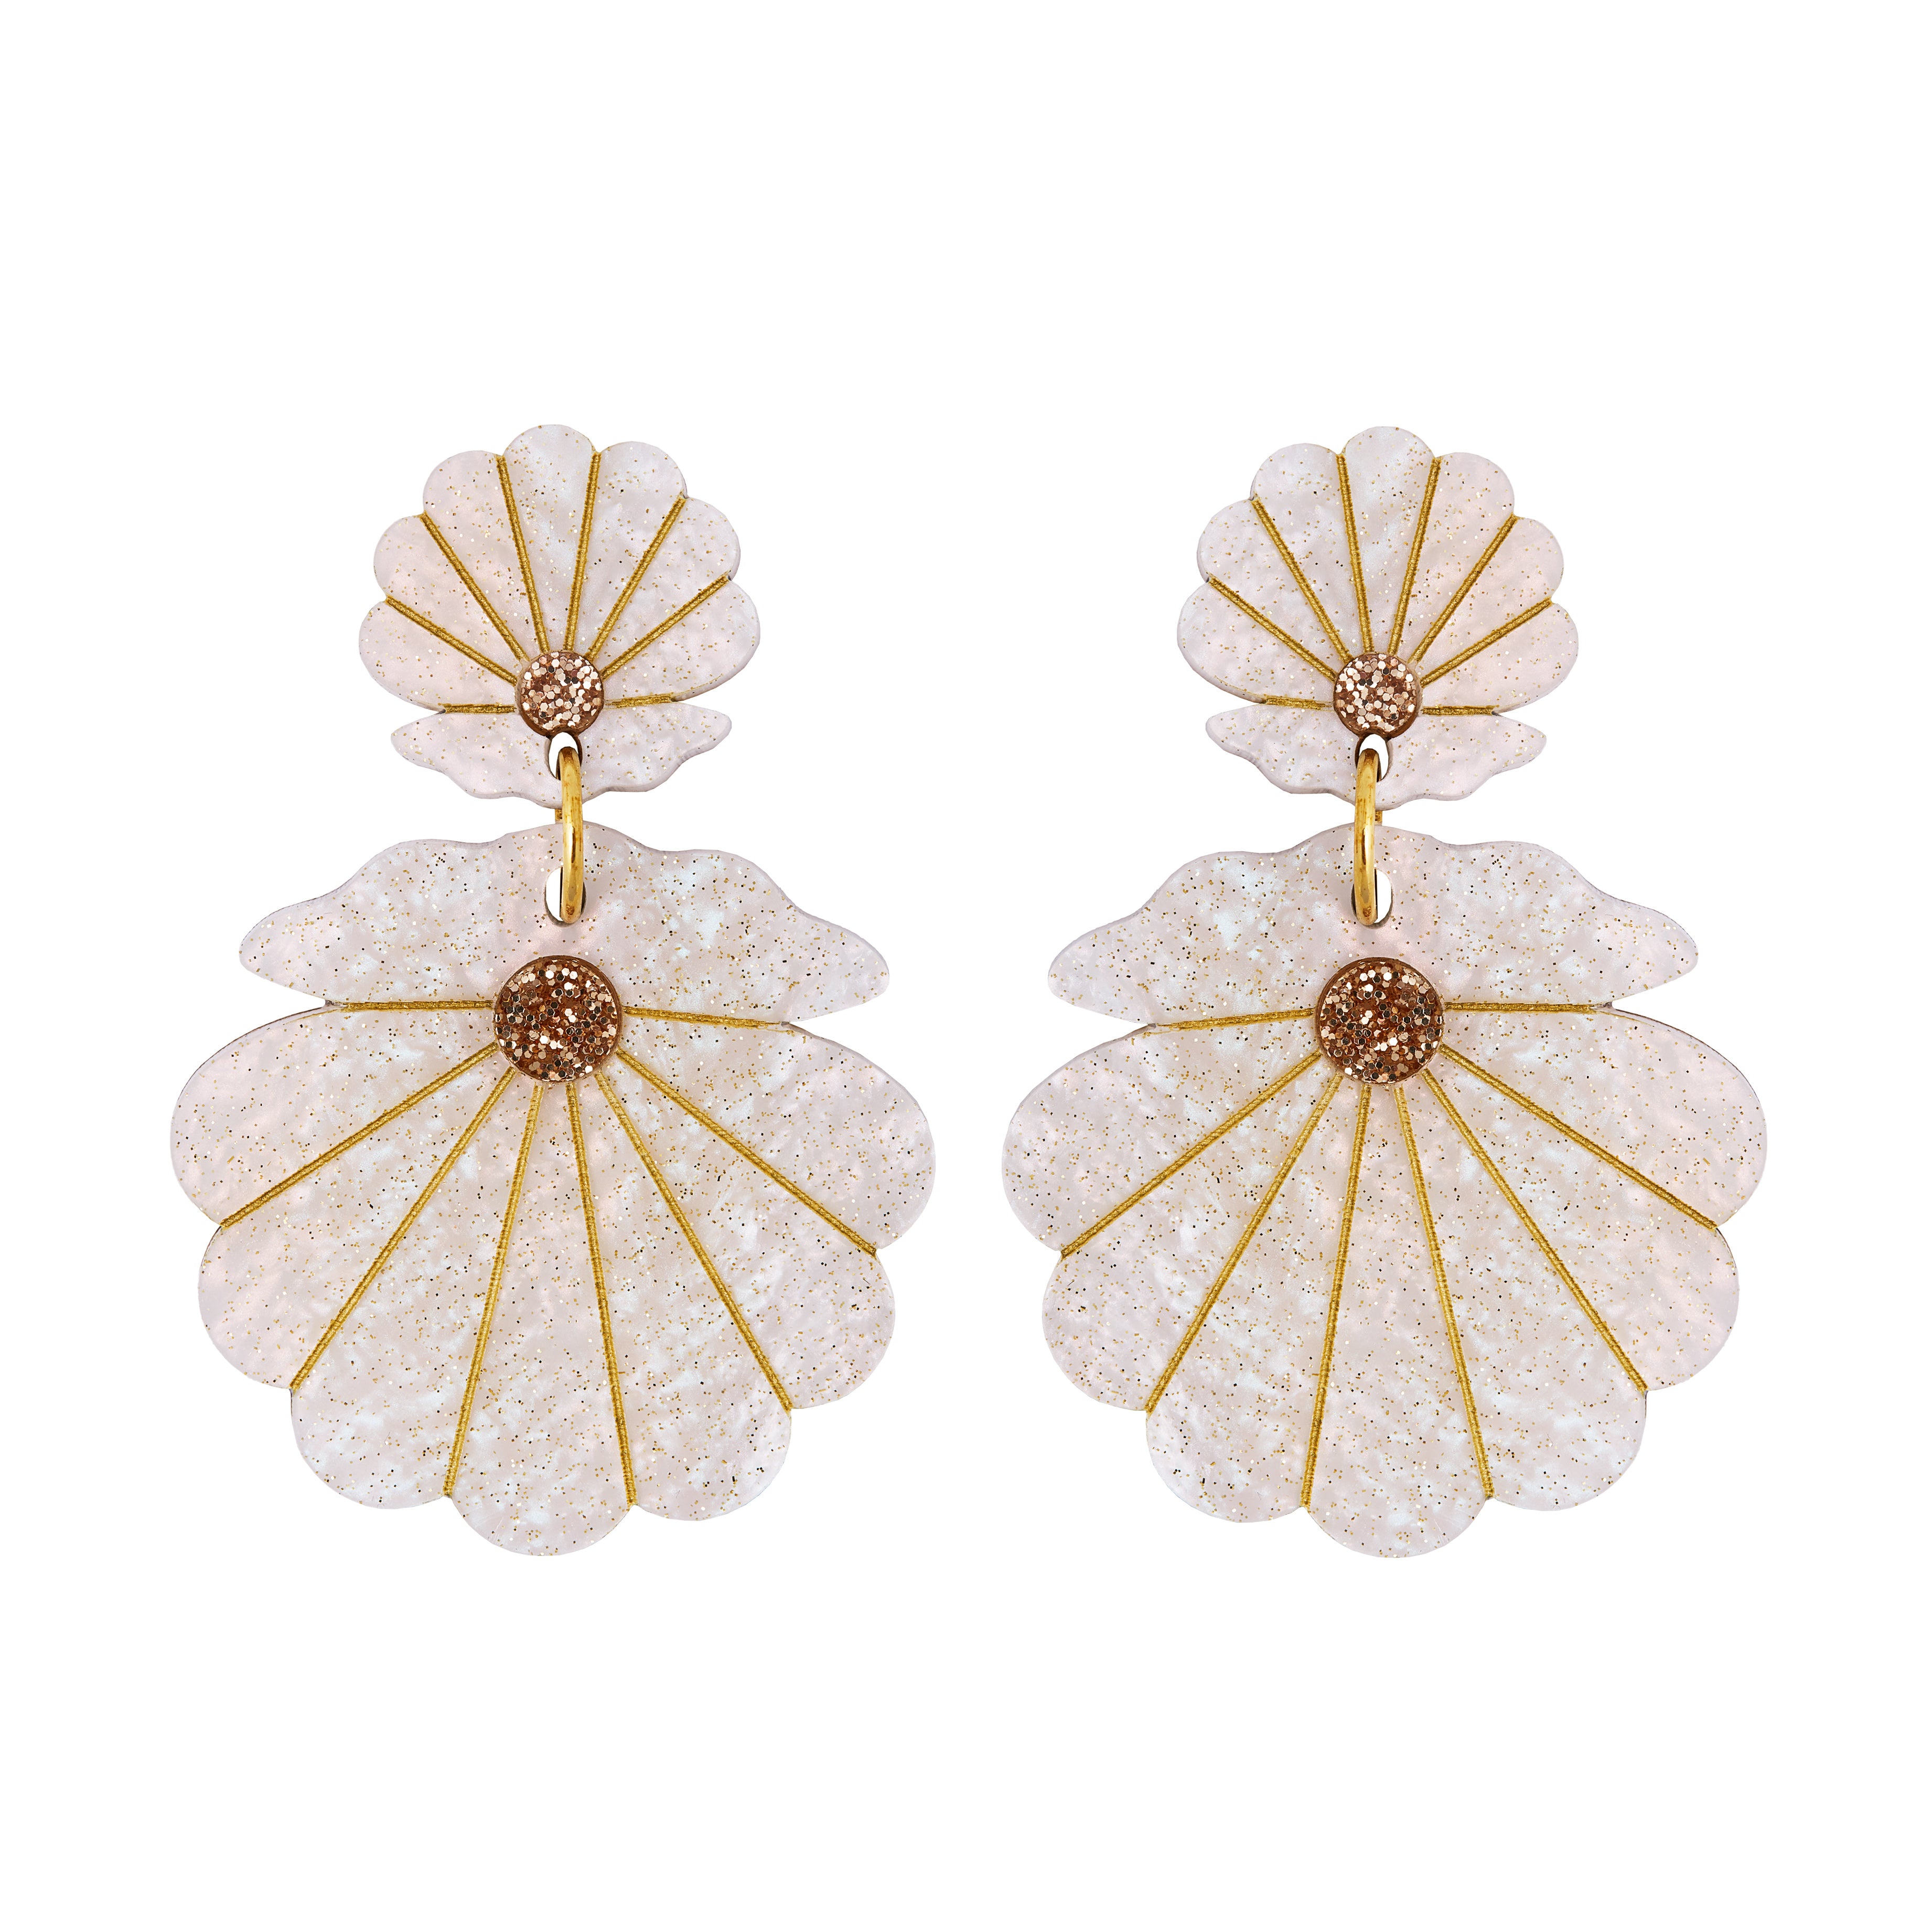 Clam Statement Earrings